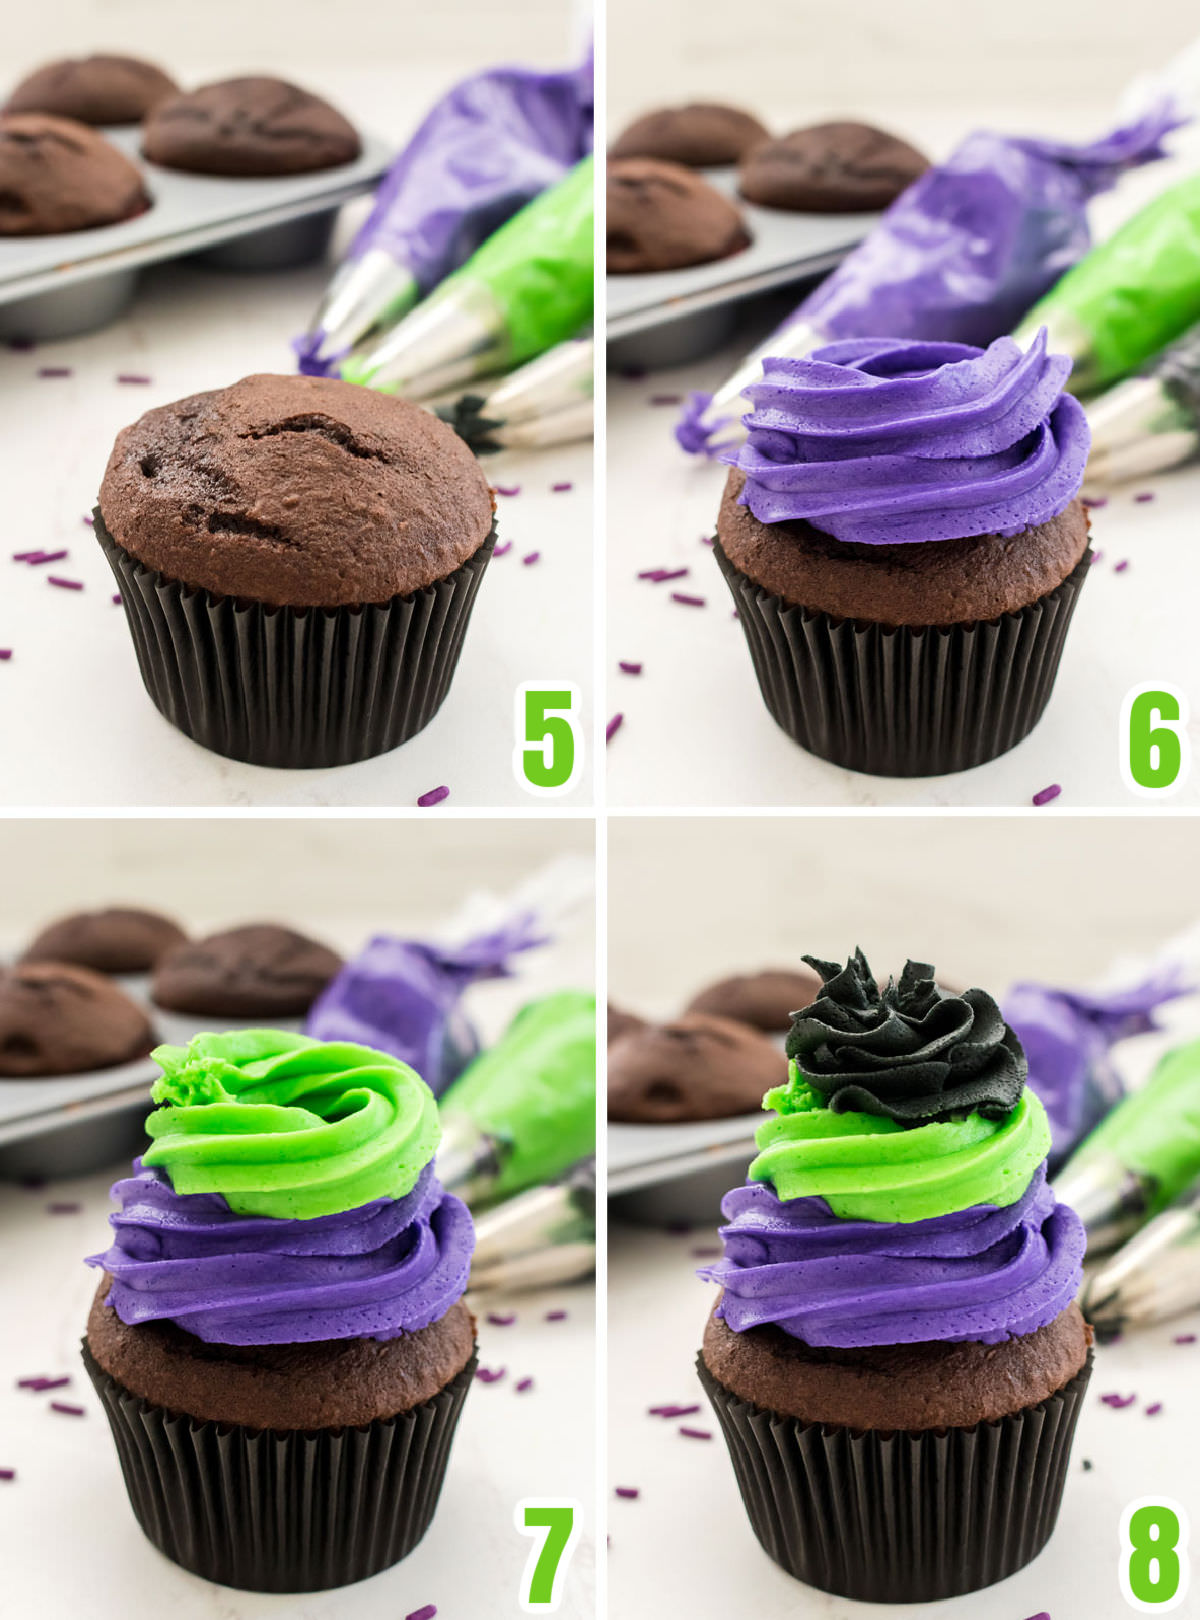 Collage image showing the steps for creating the Frosting Swirl out of purple, green and black buttercream frosting.